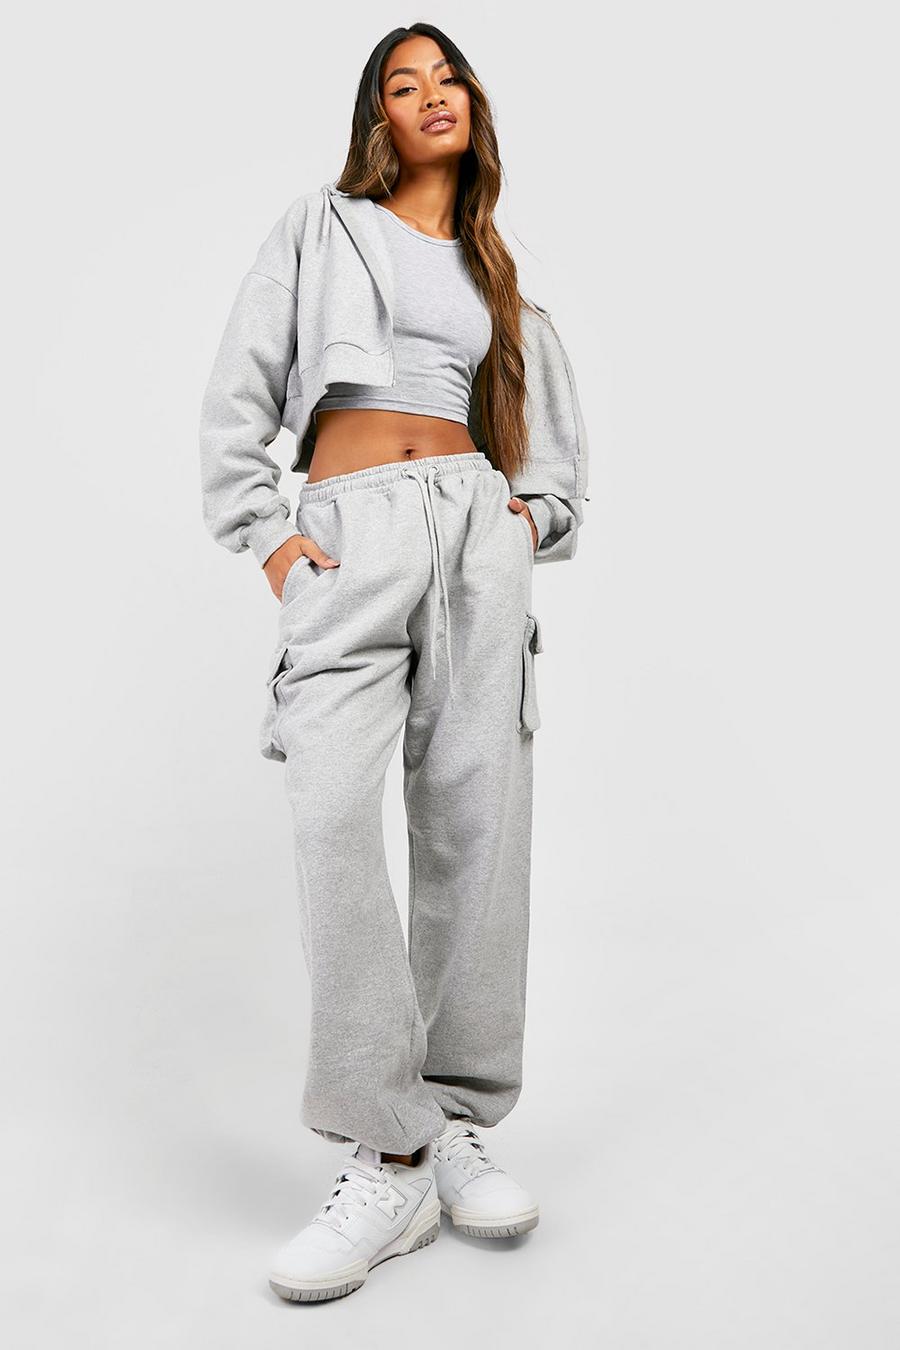 Ash grey 3 Piece Cropped Zip Through Hooded Tracksuit